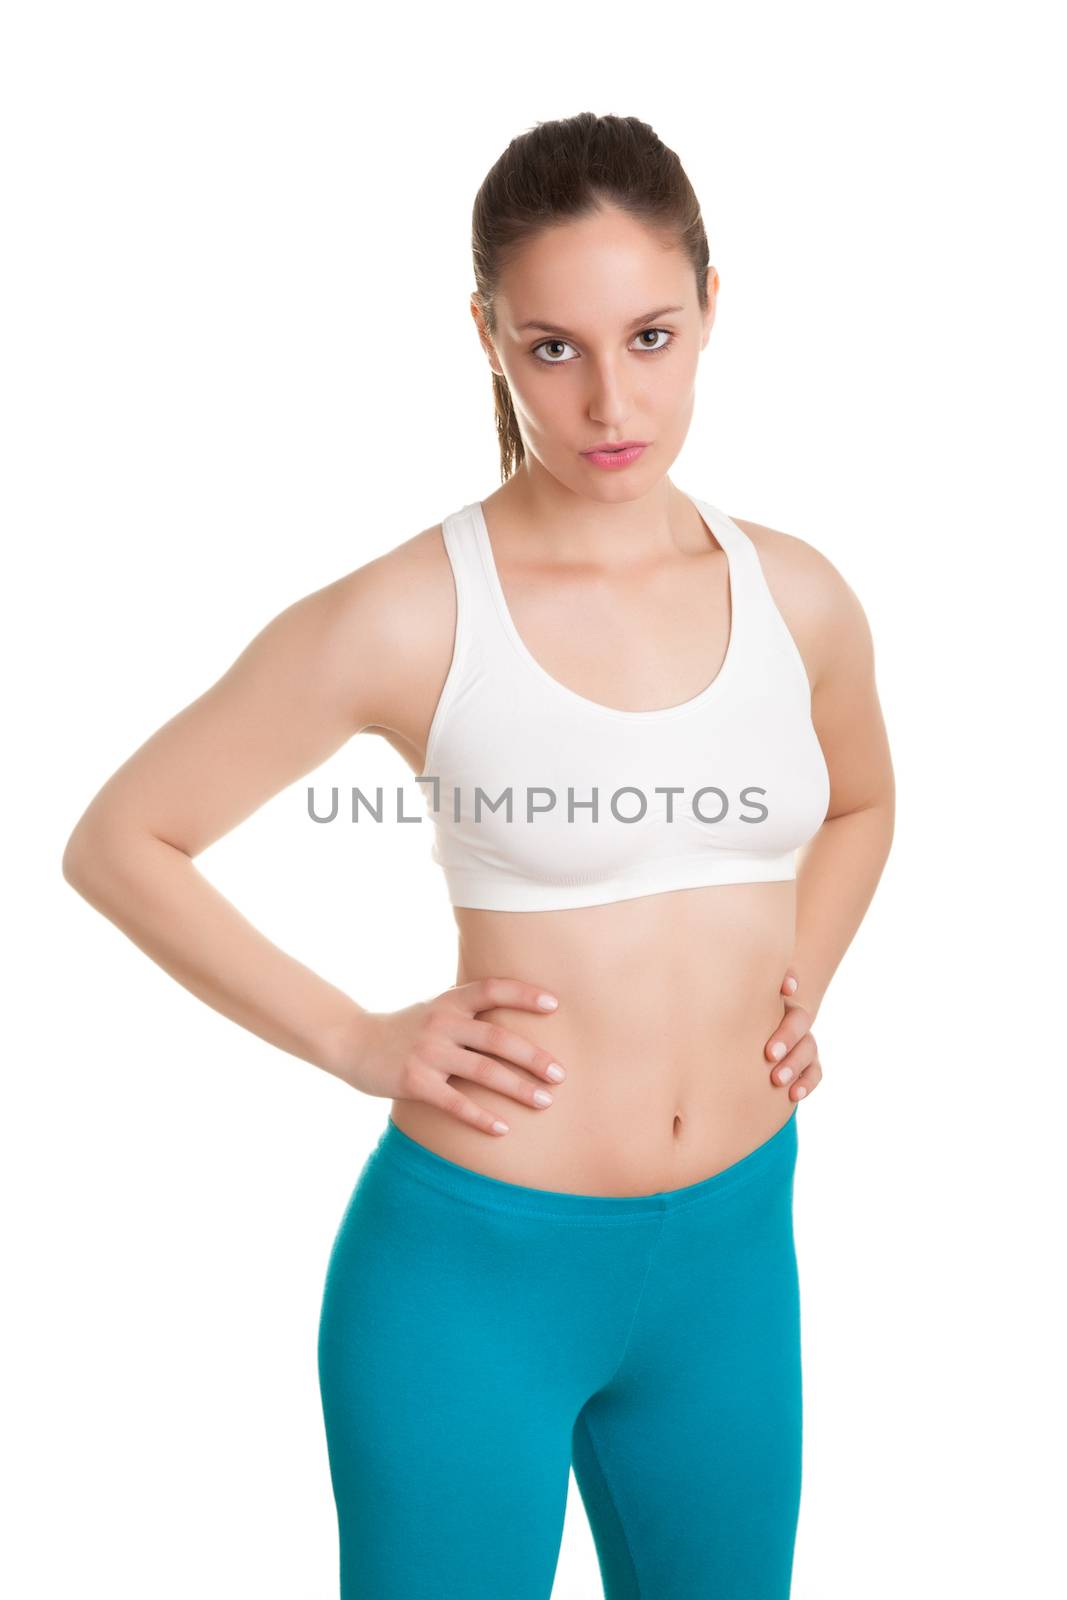 Fit woman standing and relaxing after a workout, isolated in white